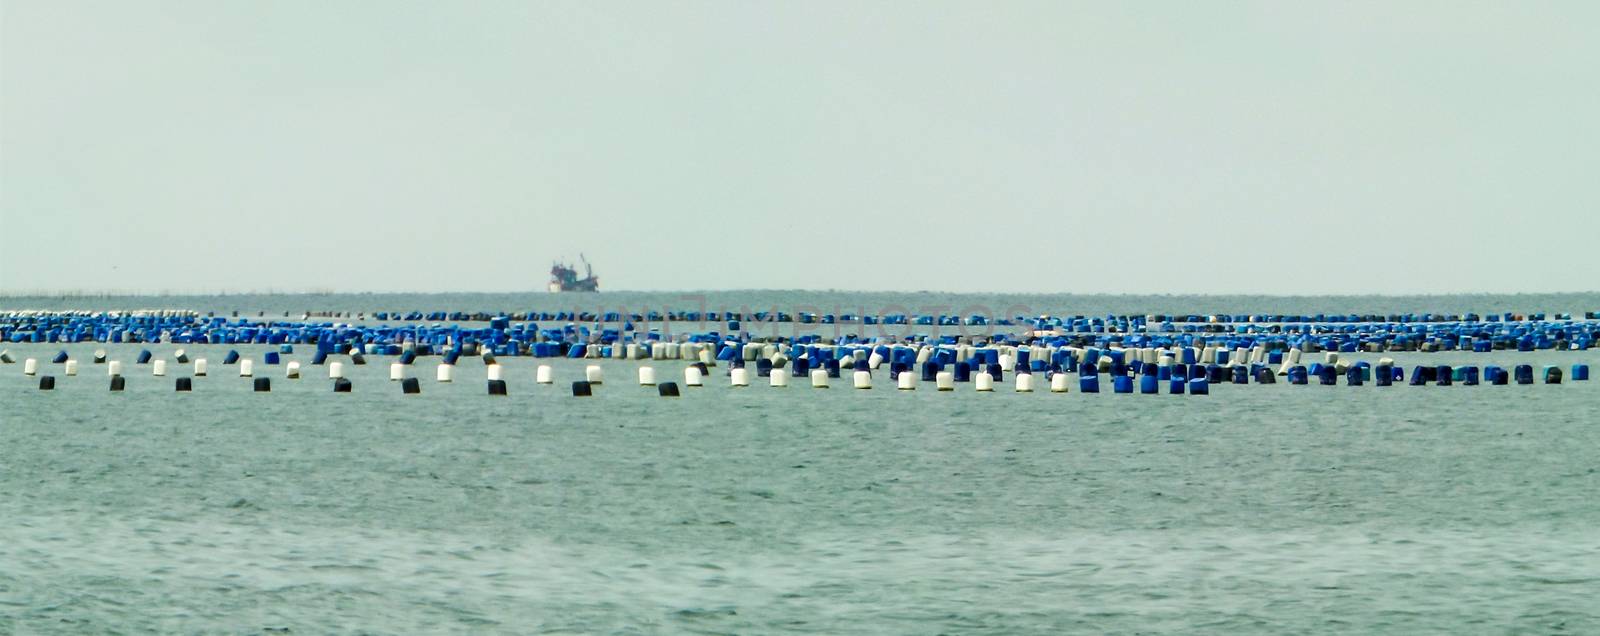 oysters farm on plastic tank buoy in the sea panorama at sriracha thailand